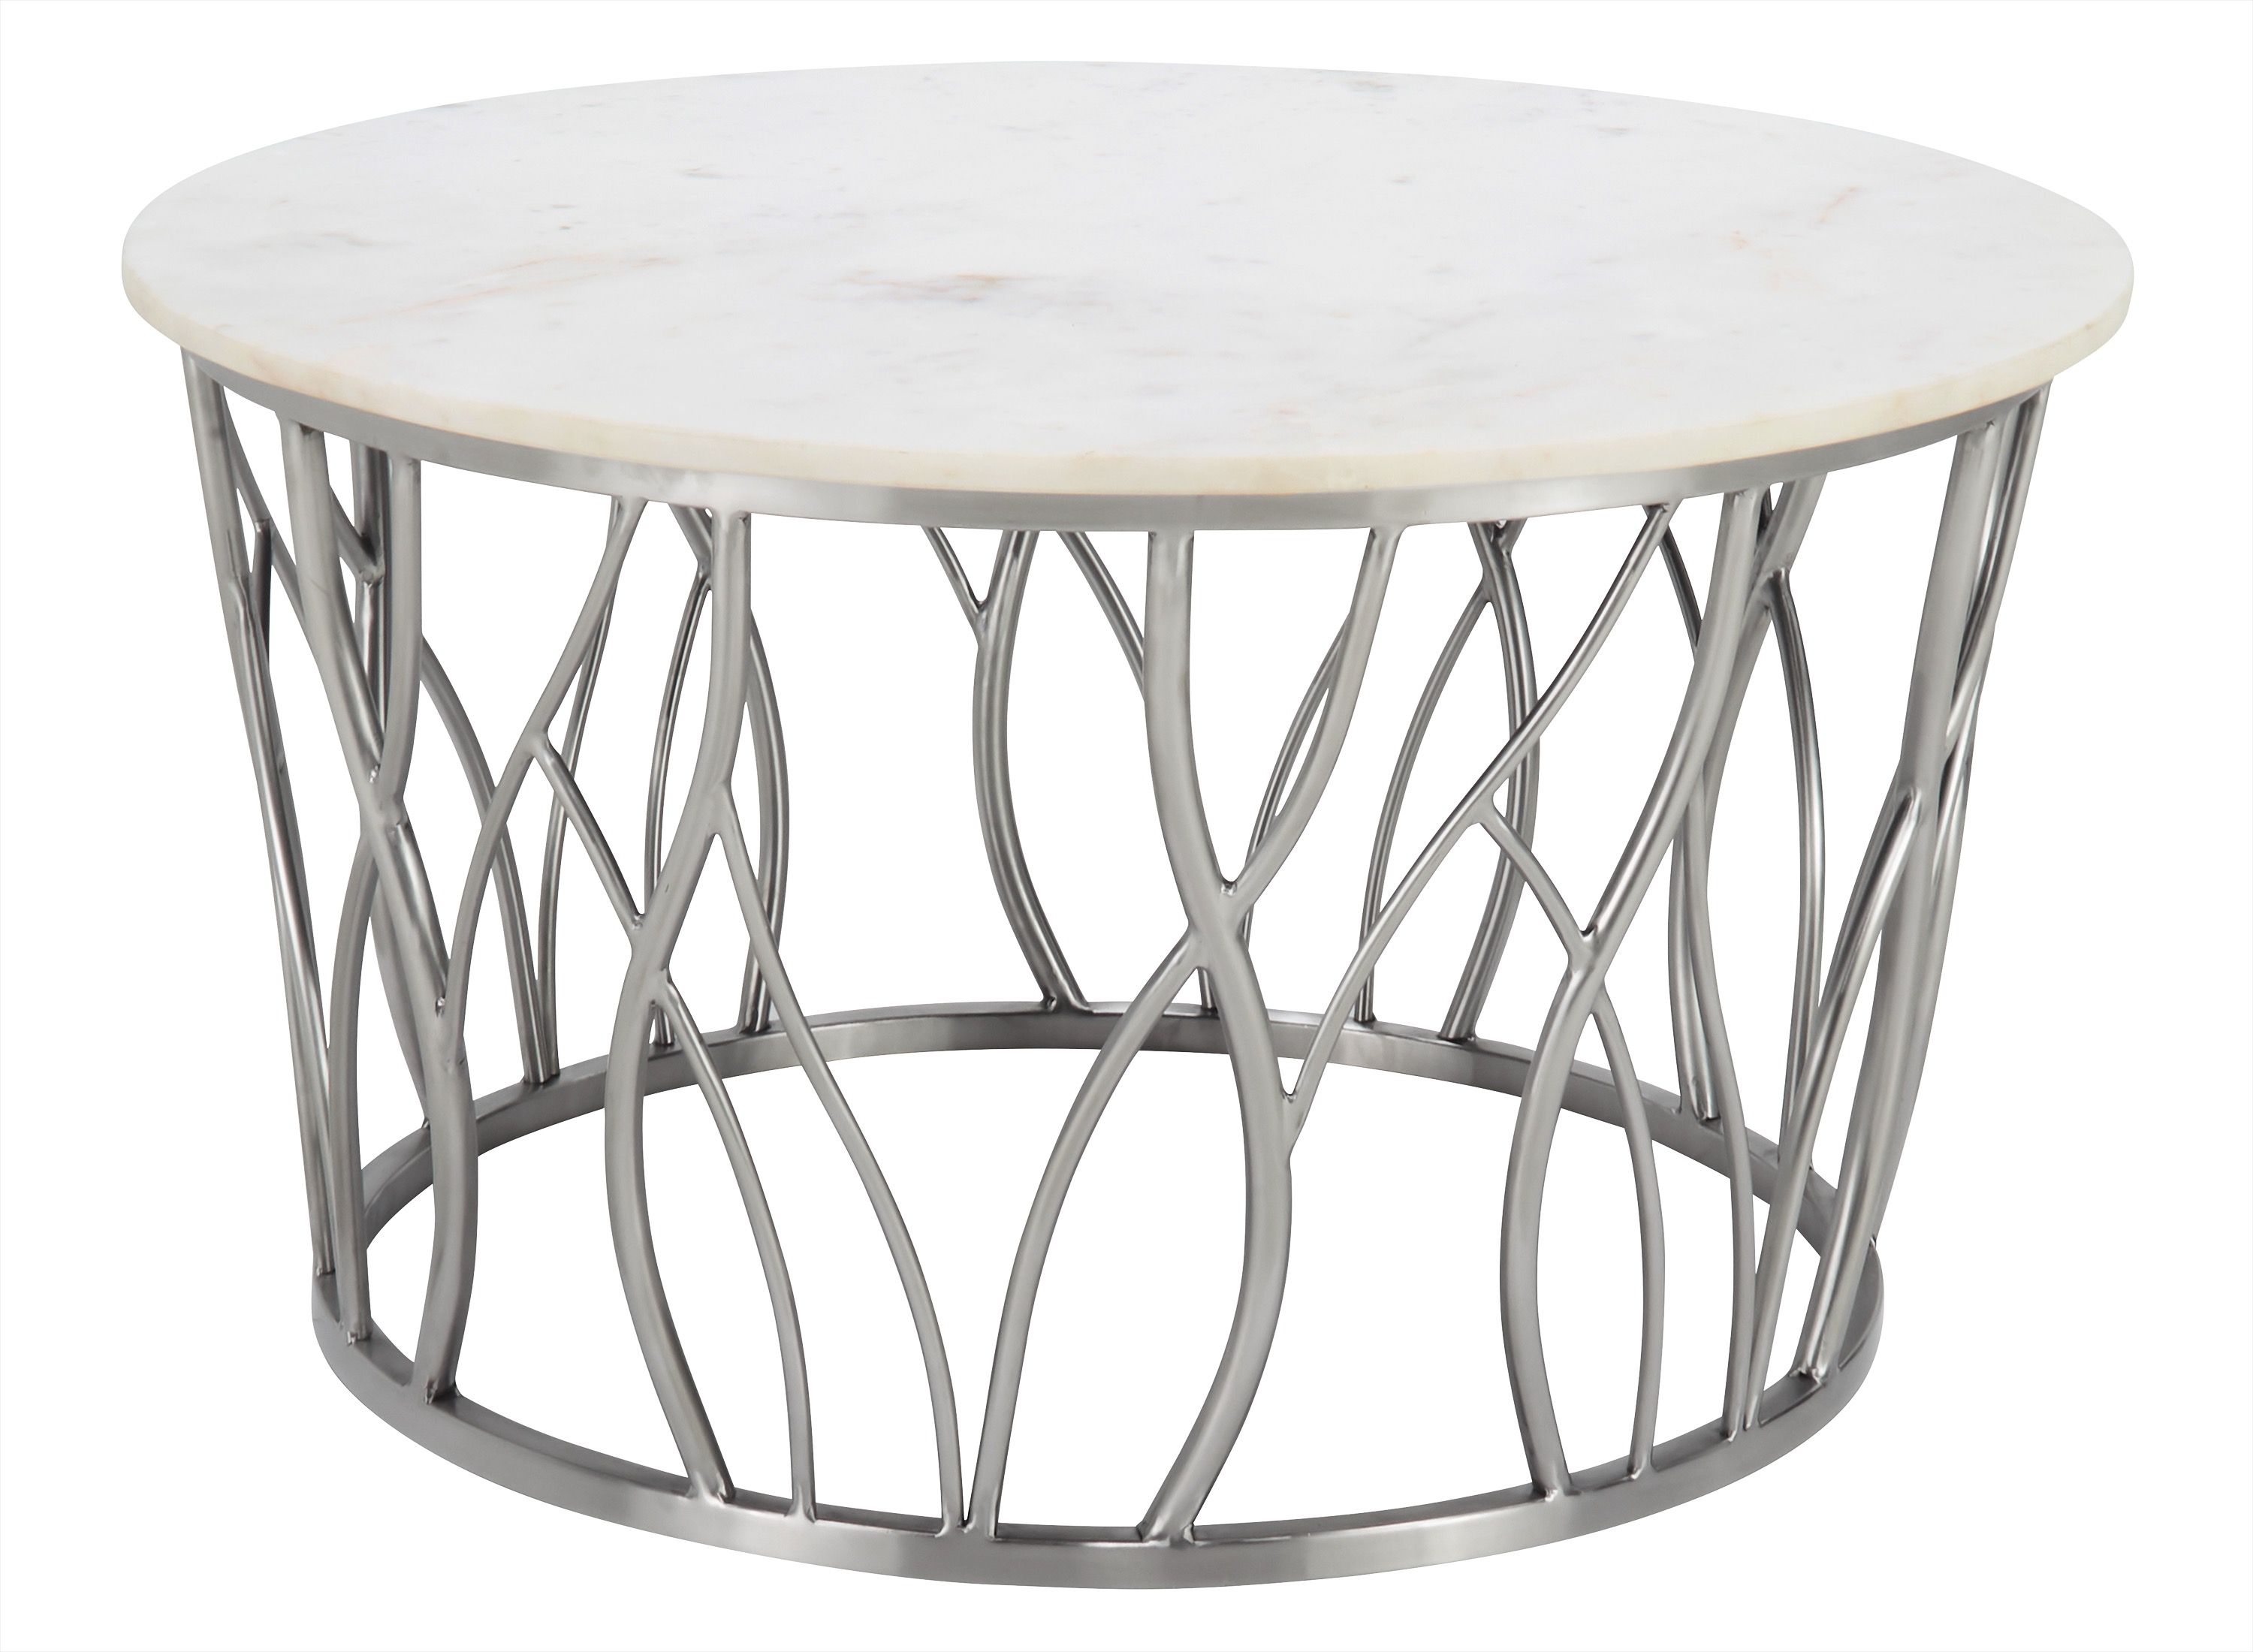 Lexia Round Cocktail Table | Raymour & Flanigan